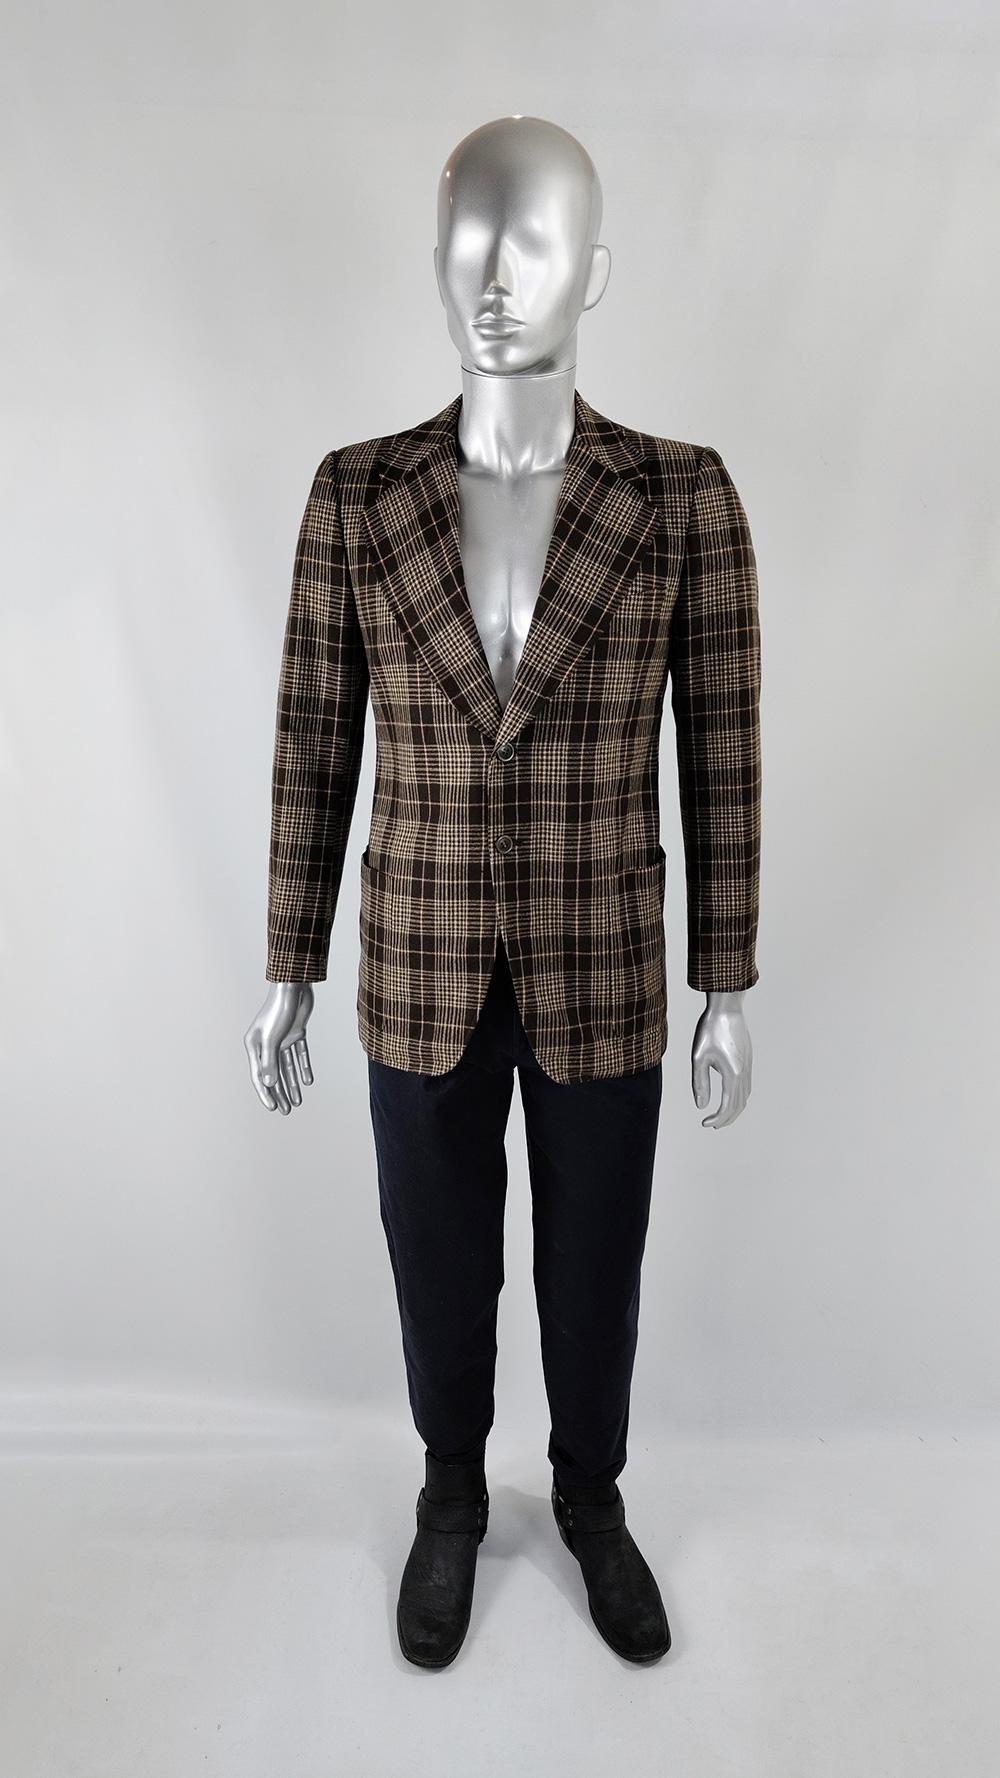 An incredible and high quality vintage mens blazer / sport coat from the 1970s. Made from a brown Italian wool cloth produced by luxury Italian manufacturer, Lanificio Botto Giuseppe & Figli - founded in 1876 and known for their quality and